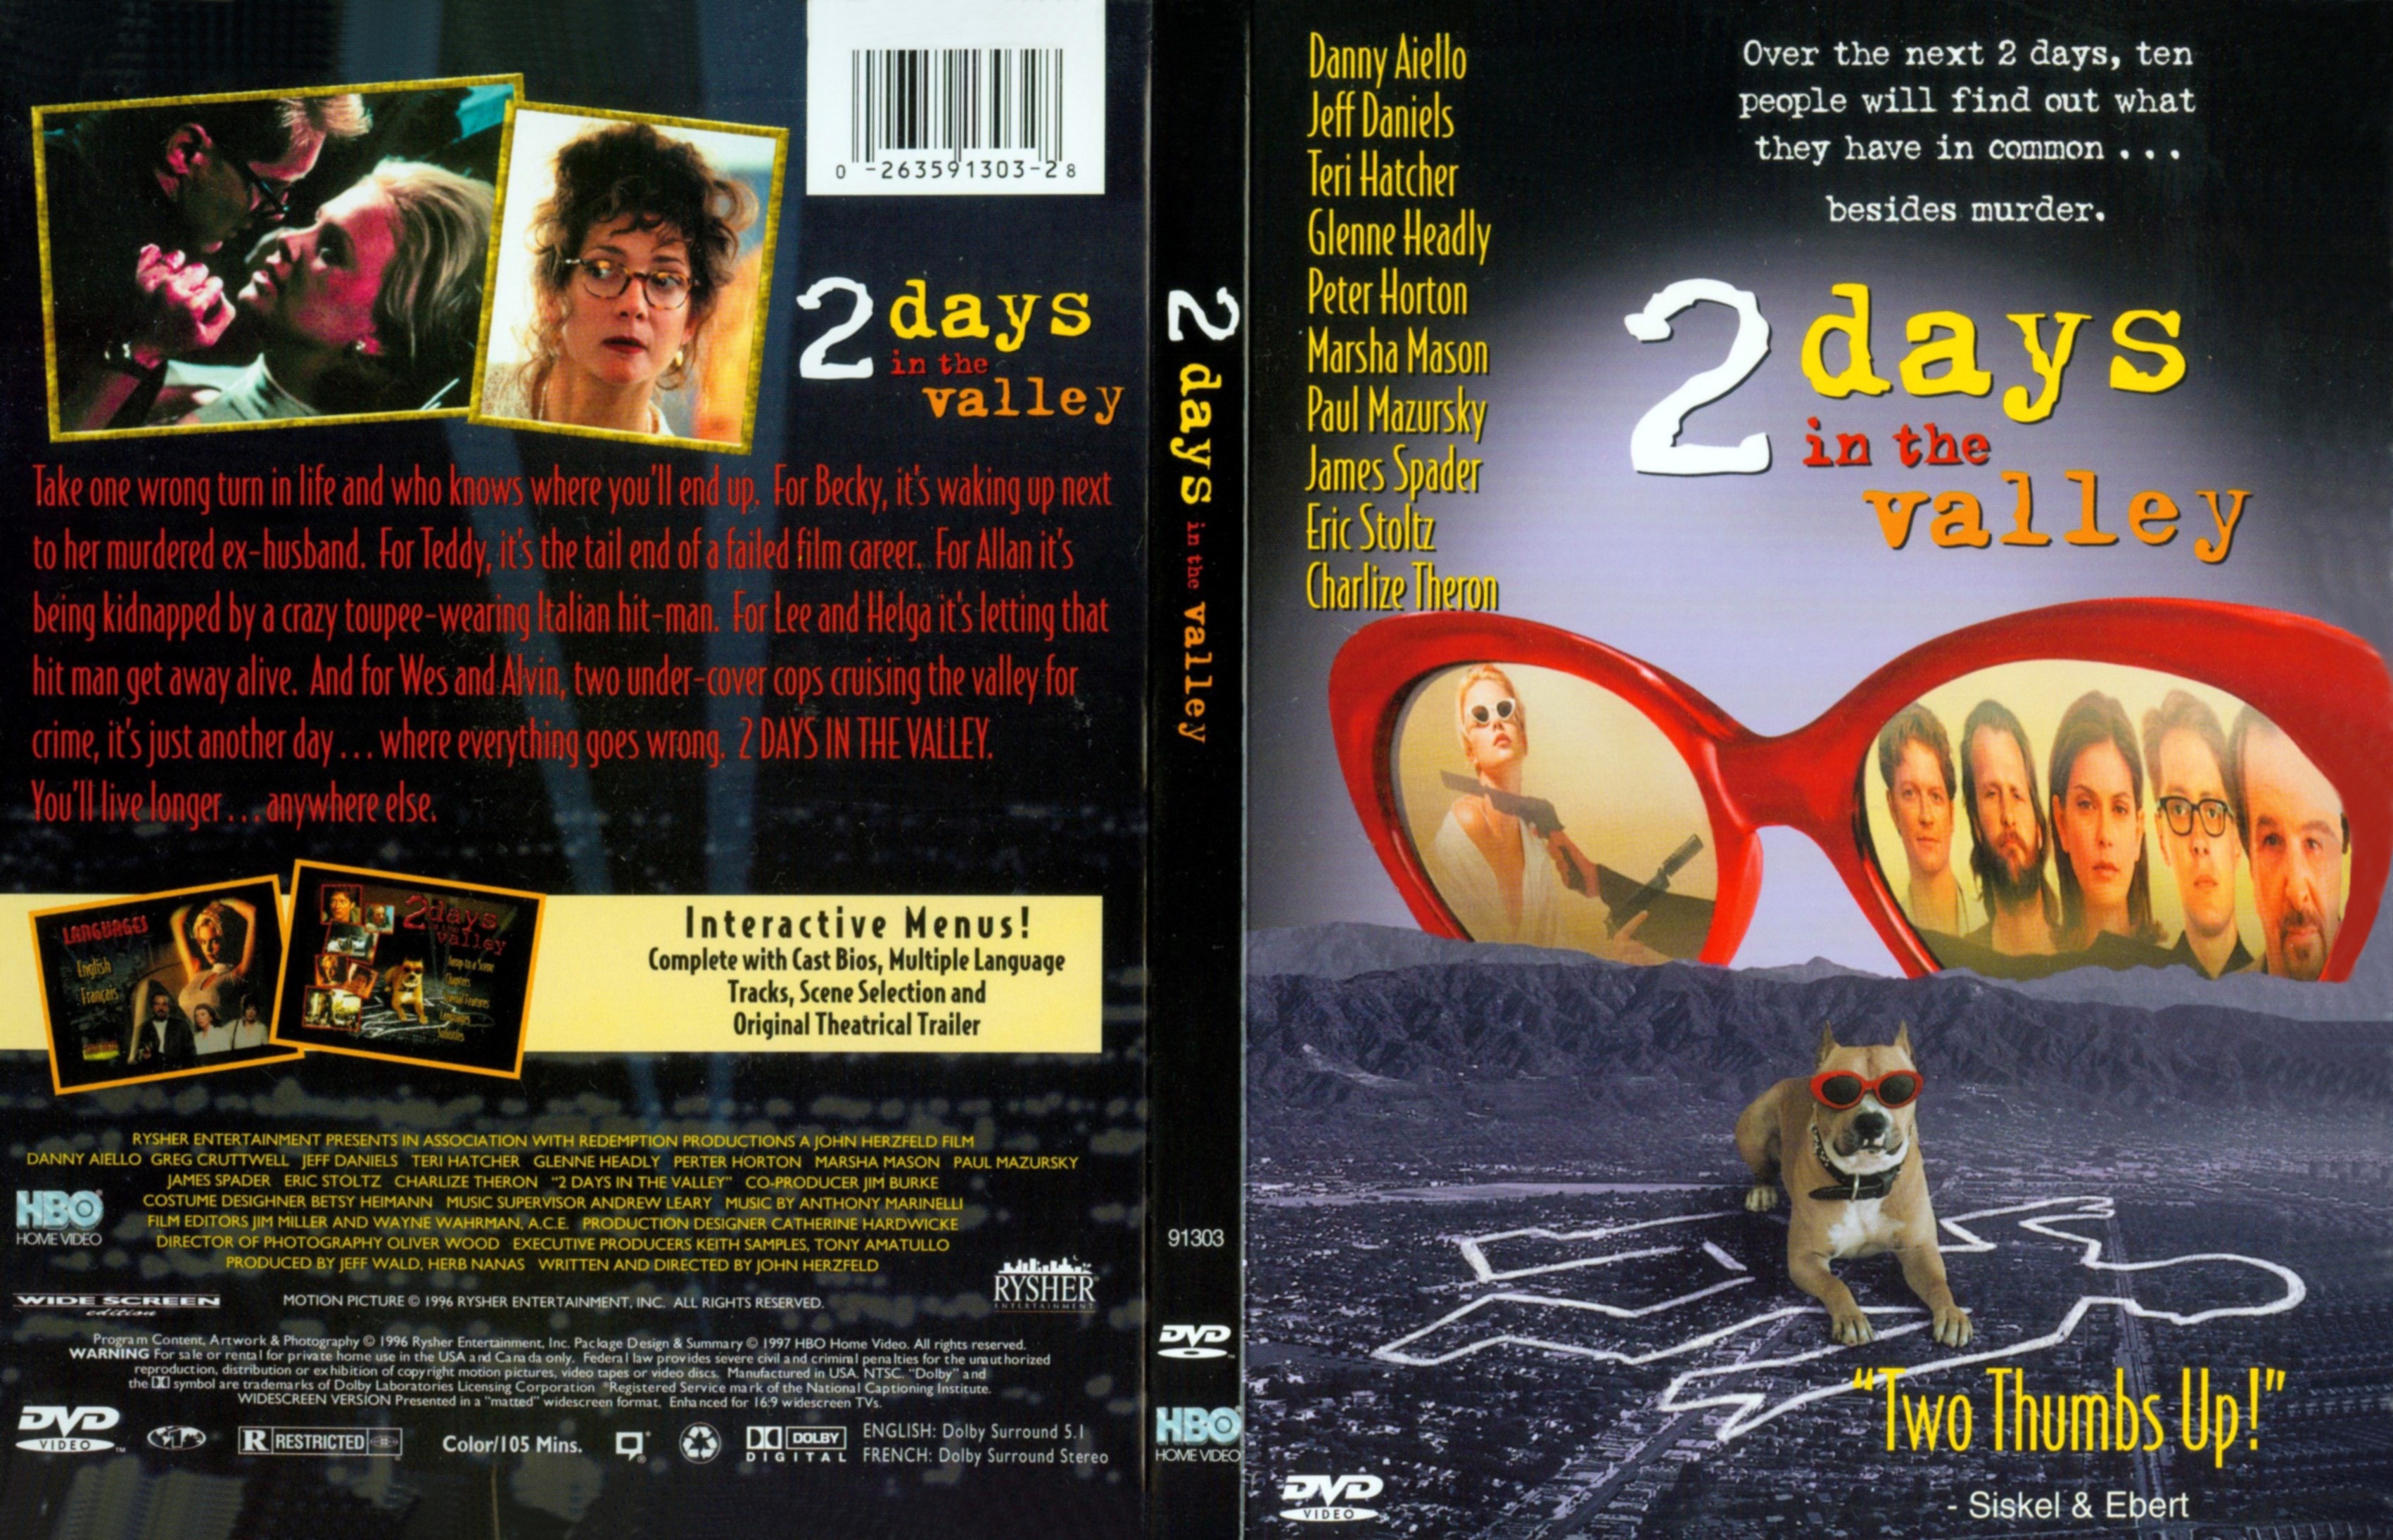 Jaquette DVD 2 days in the valley Zone 1